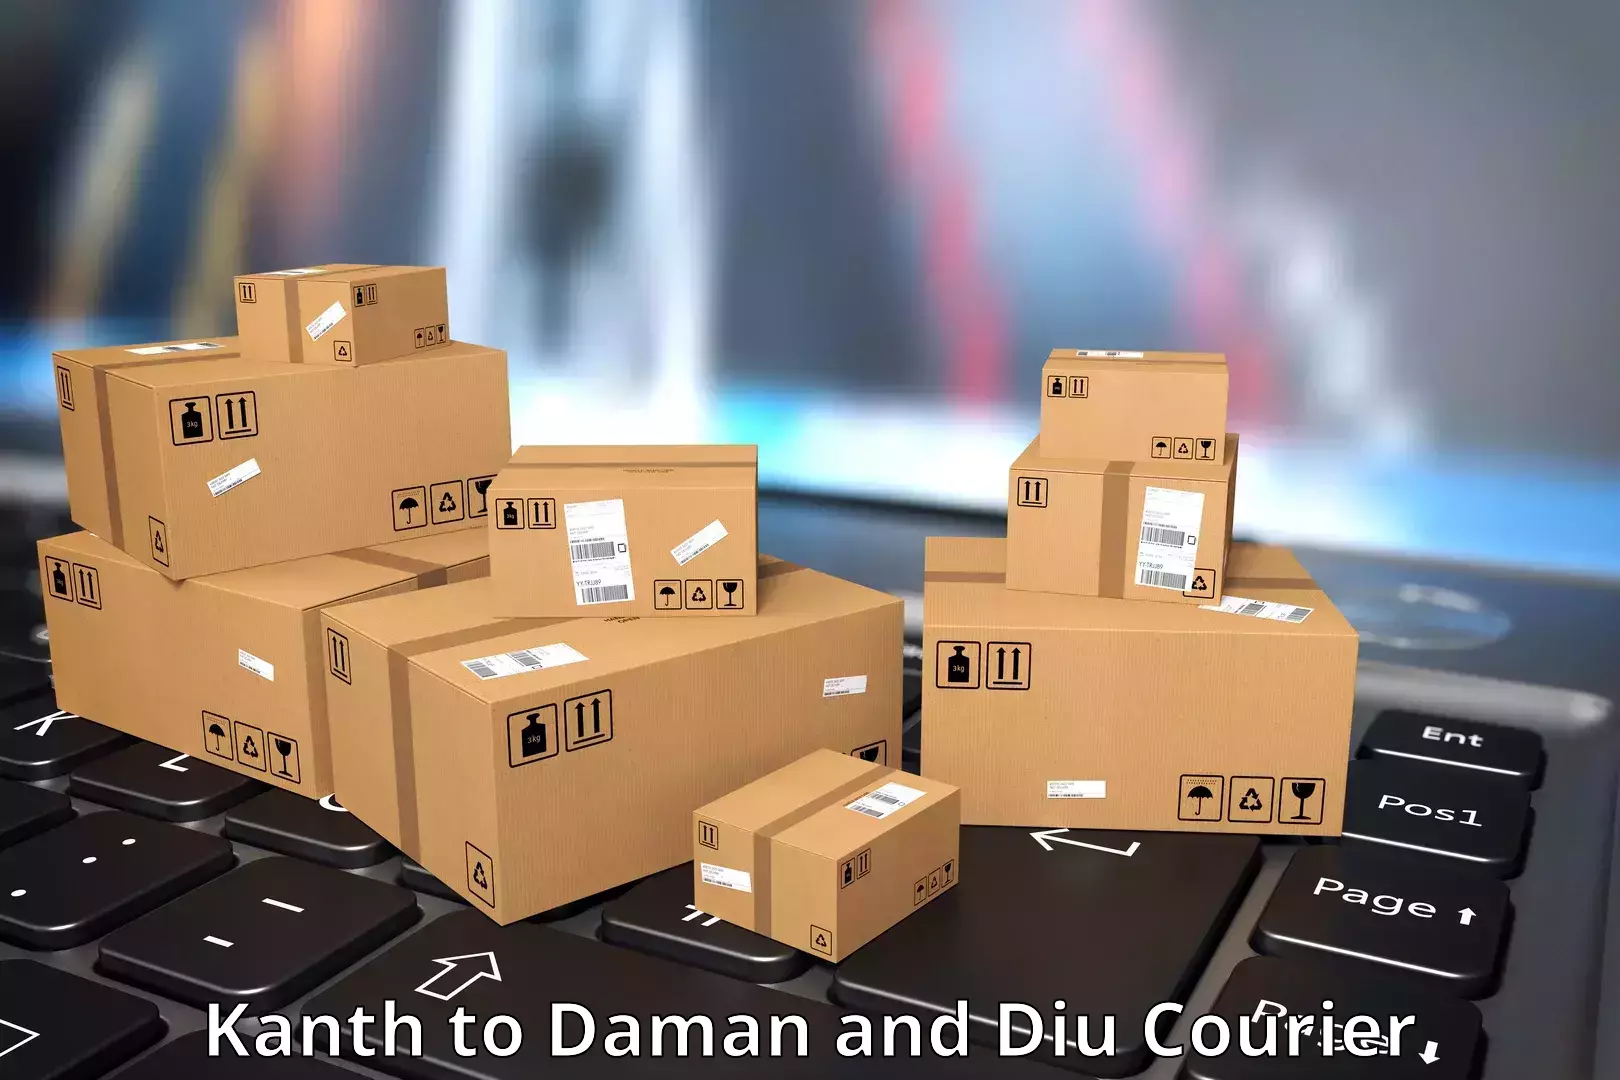 Courier service innovation in Kanth to Diu